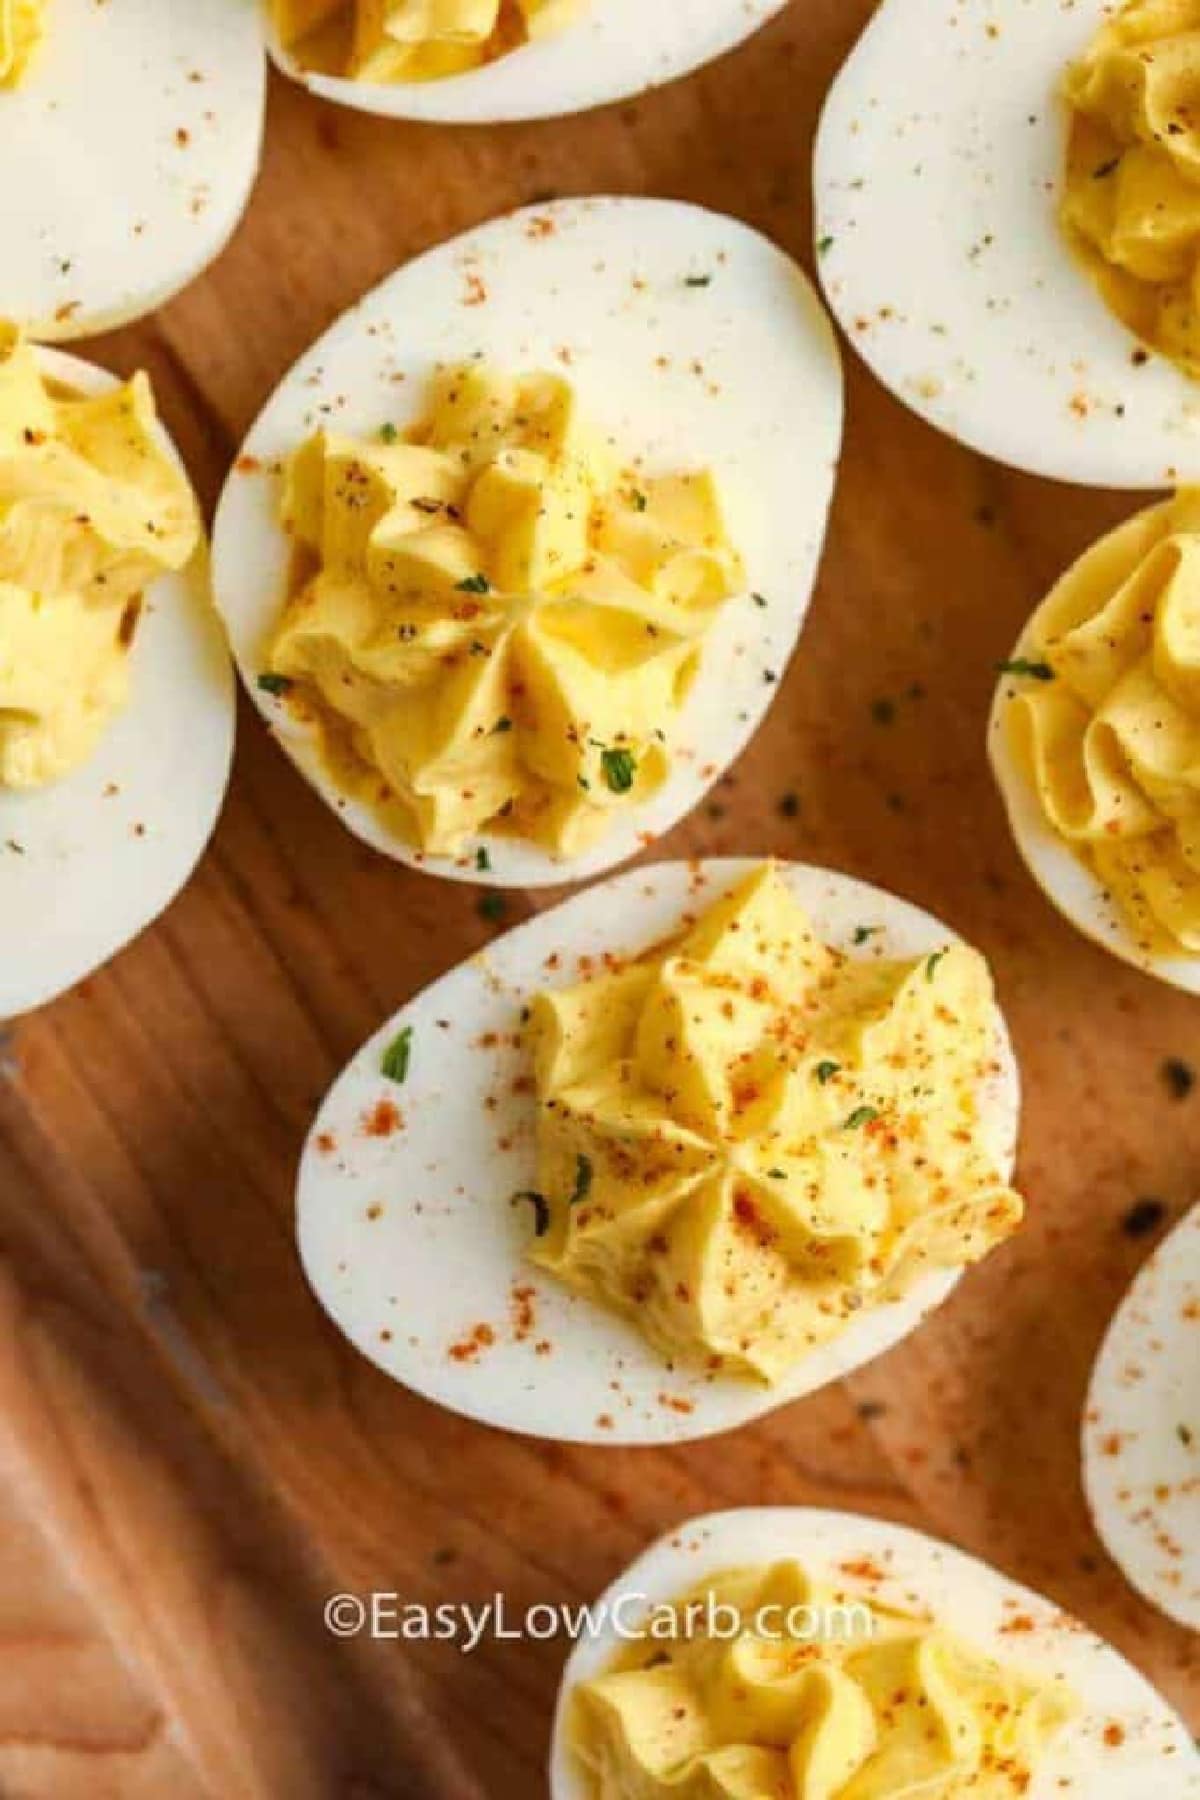 Keto Deviled Eggs sitting on a wooden board and garnished with paprika and fresh parsley